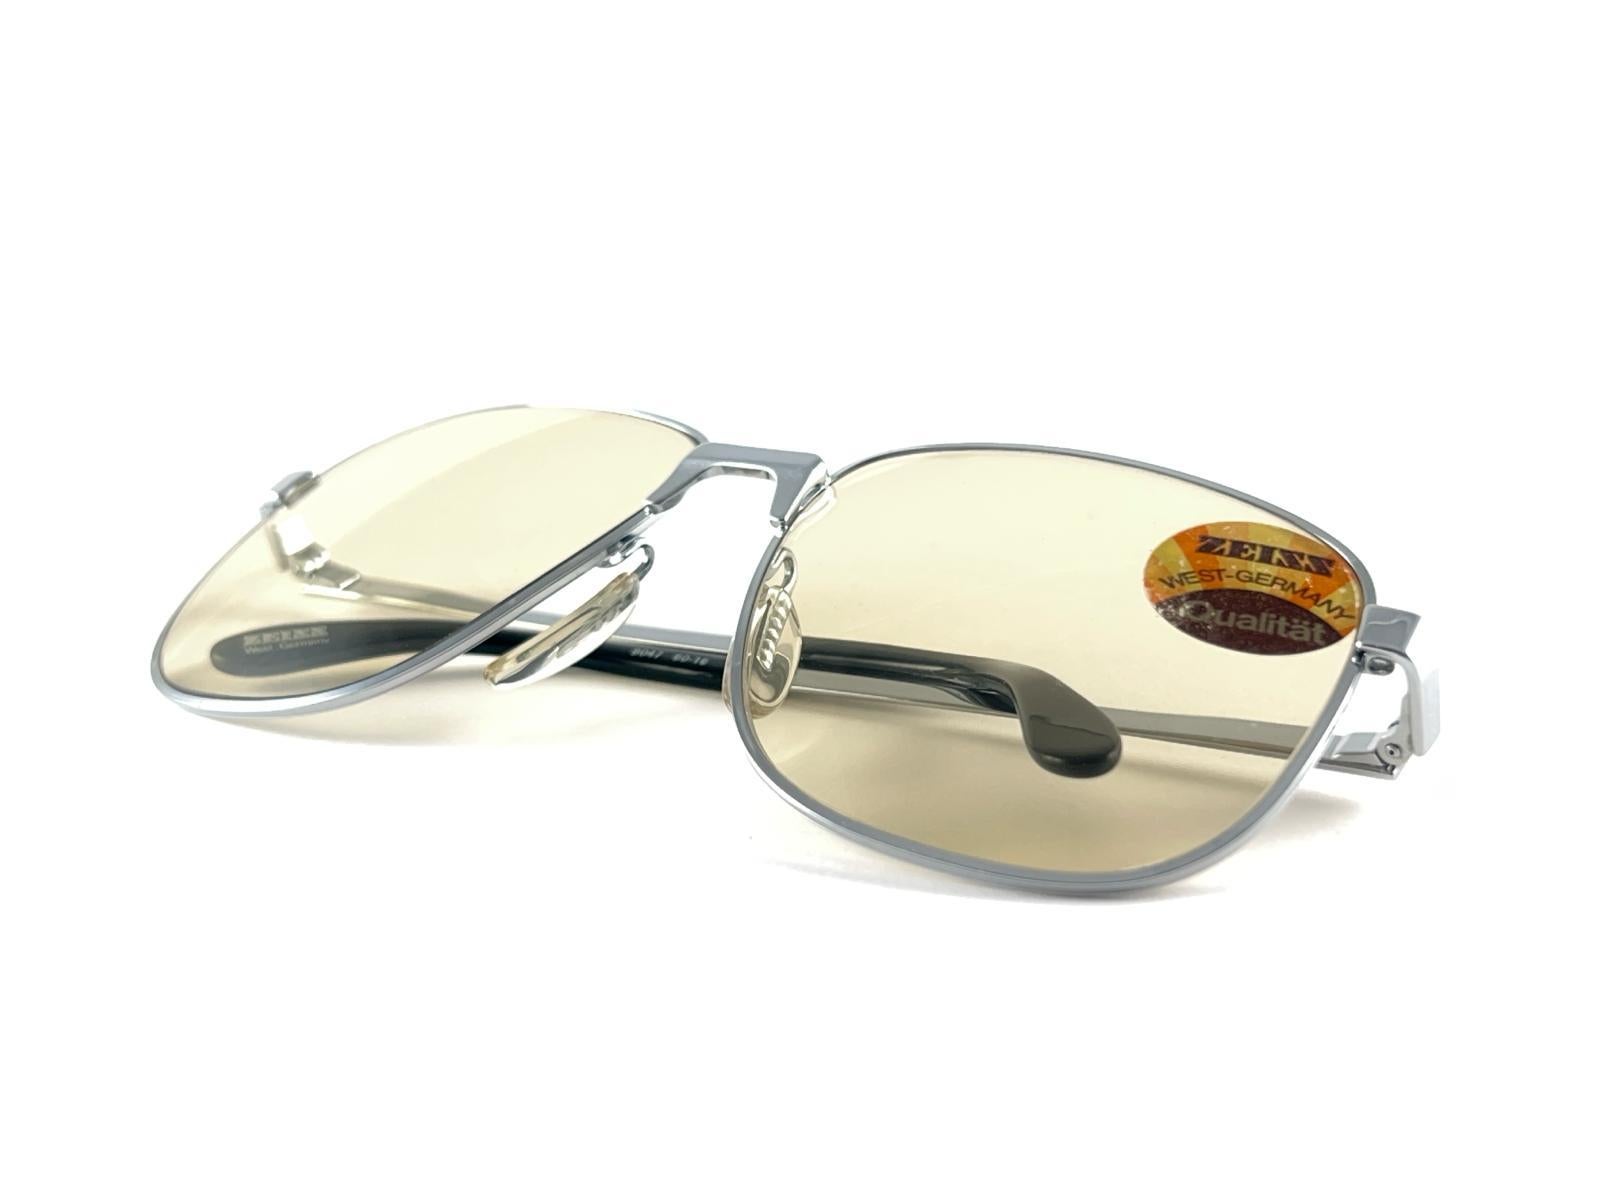 
Vintage sunglasses by Zeiss 9047 craftsmanship and design in a strong and functional frame.
Oversized Silver frame holding a spotless pair of light lenses.



Made in West Germany


front                                14.5 cms
lens height         